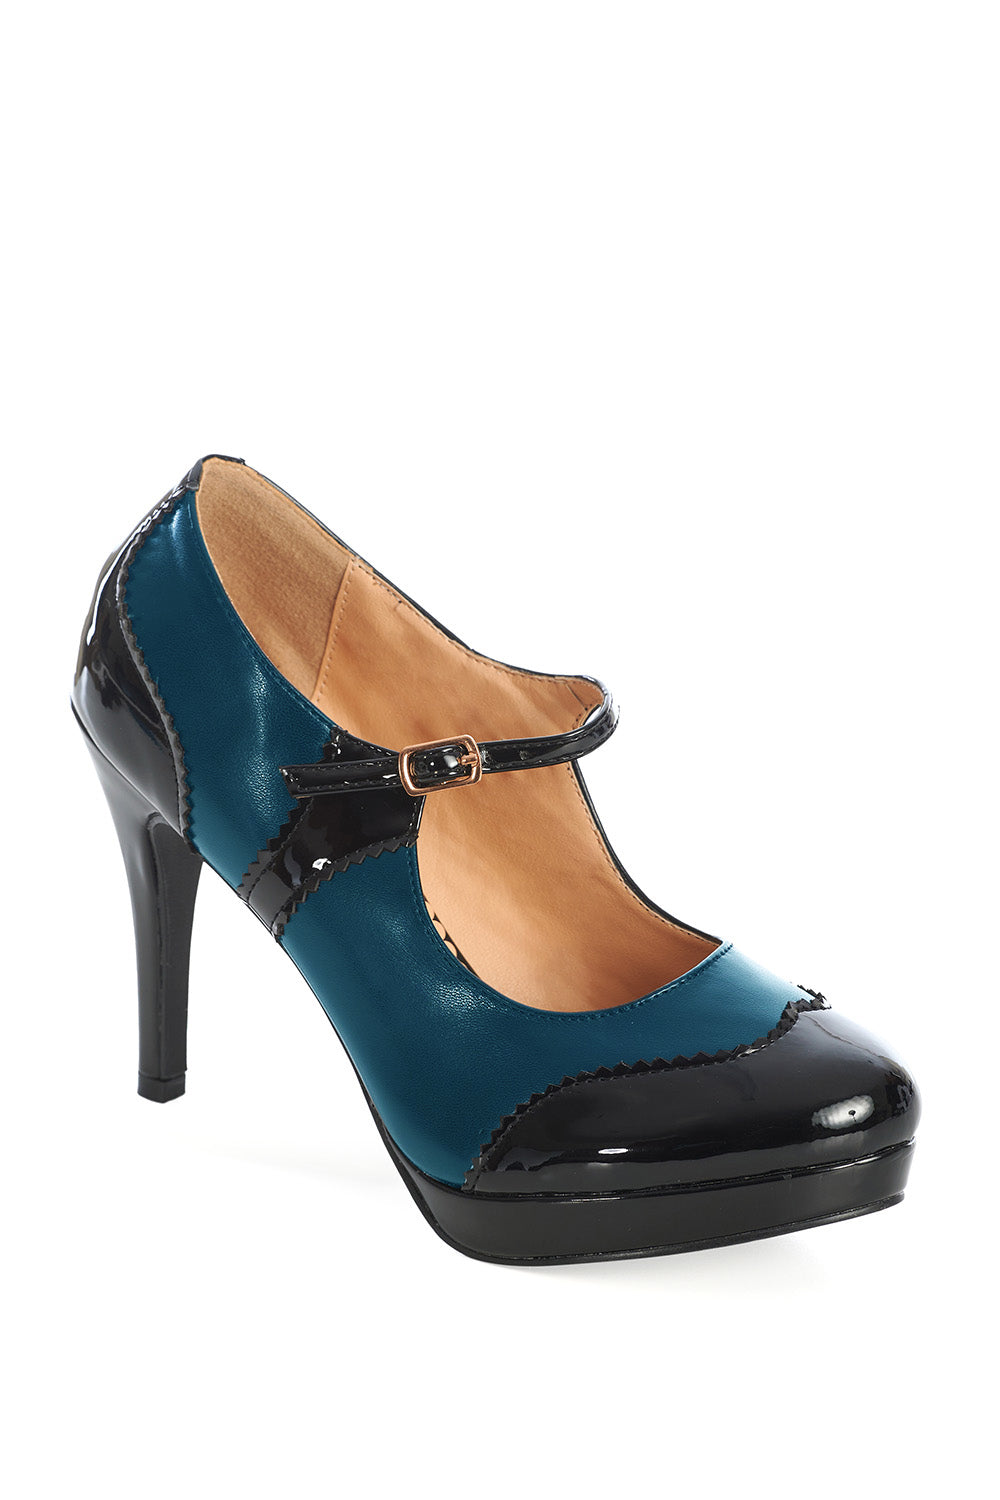 Classic Mary Jane Heels by Banned